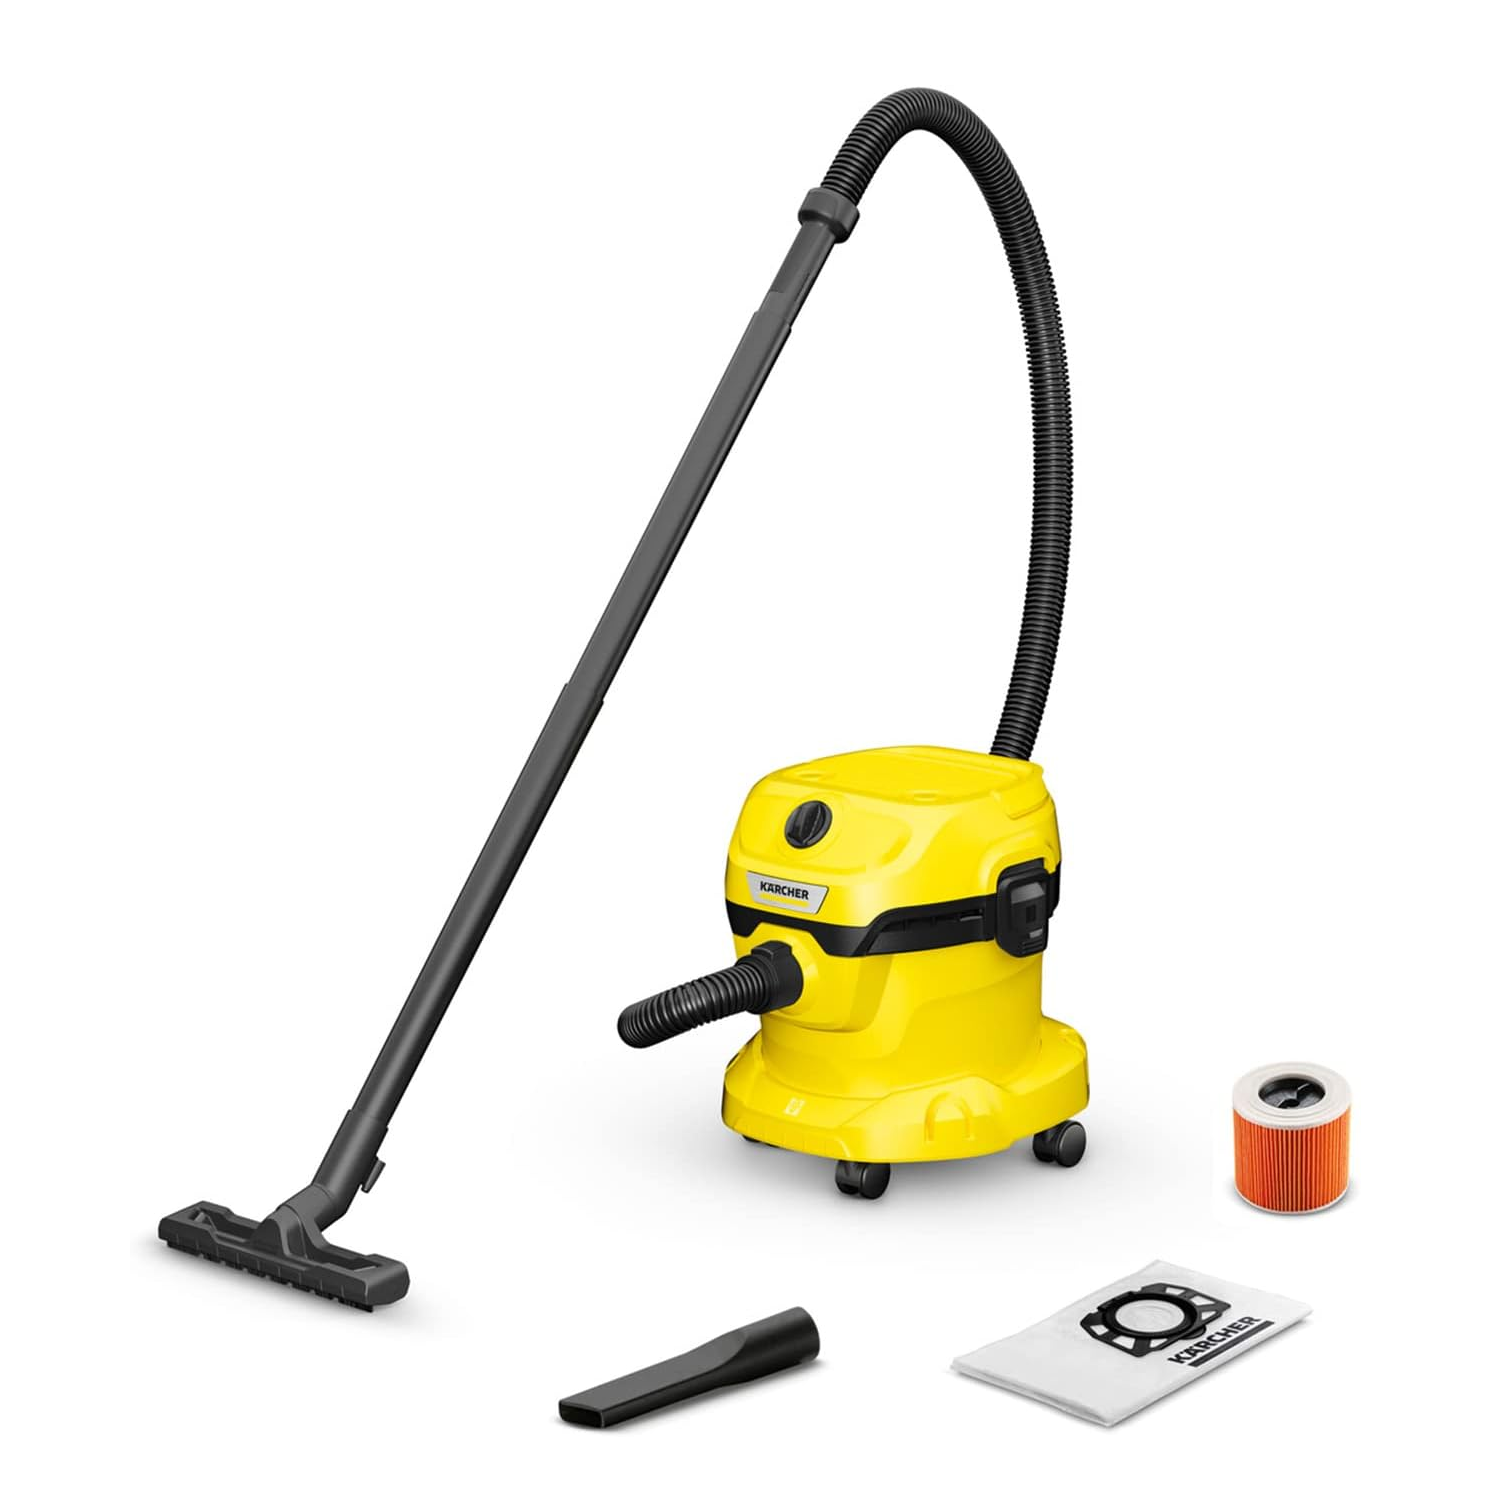 Karcher wd 2 plus wet and dry vacuum cleaner – model: 16280020